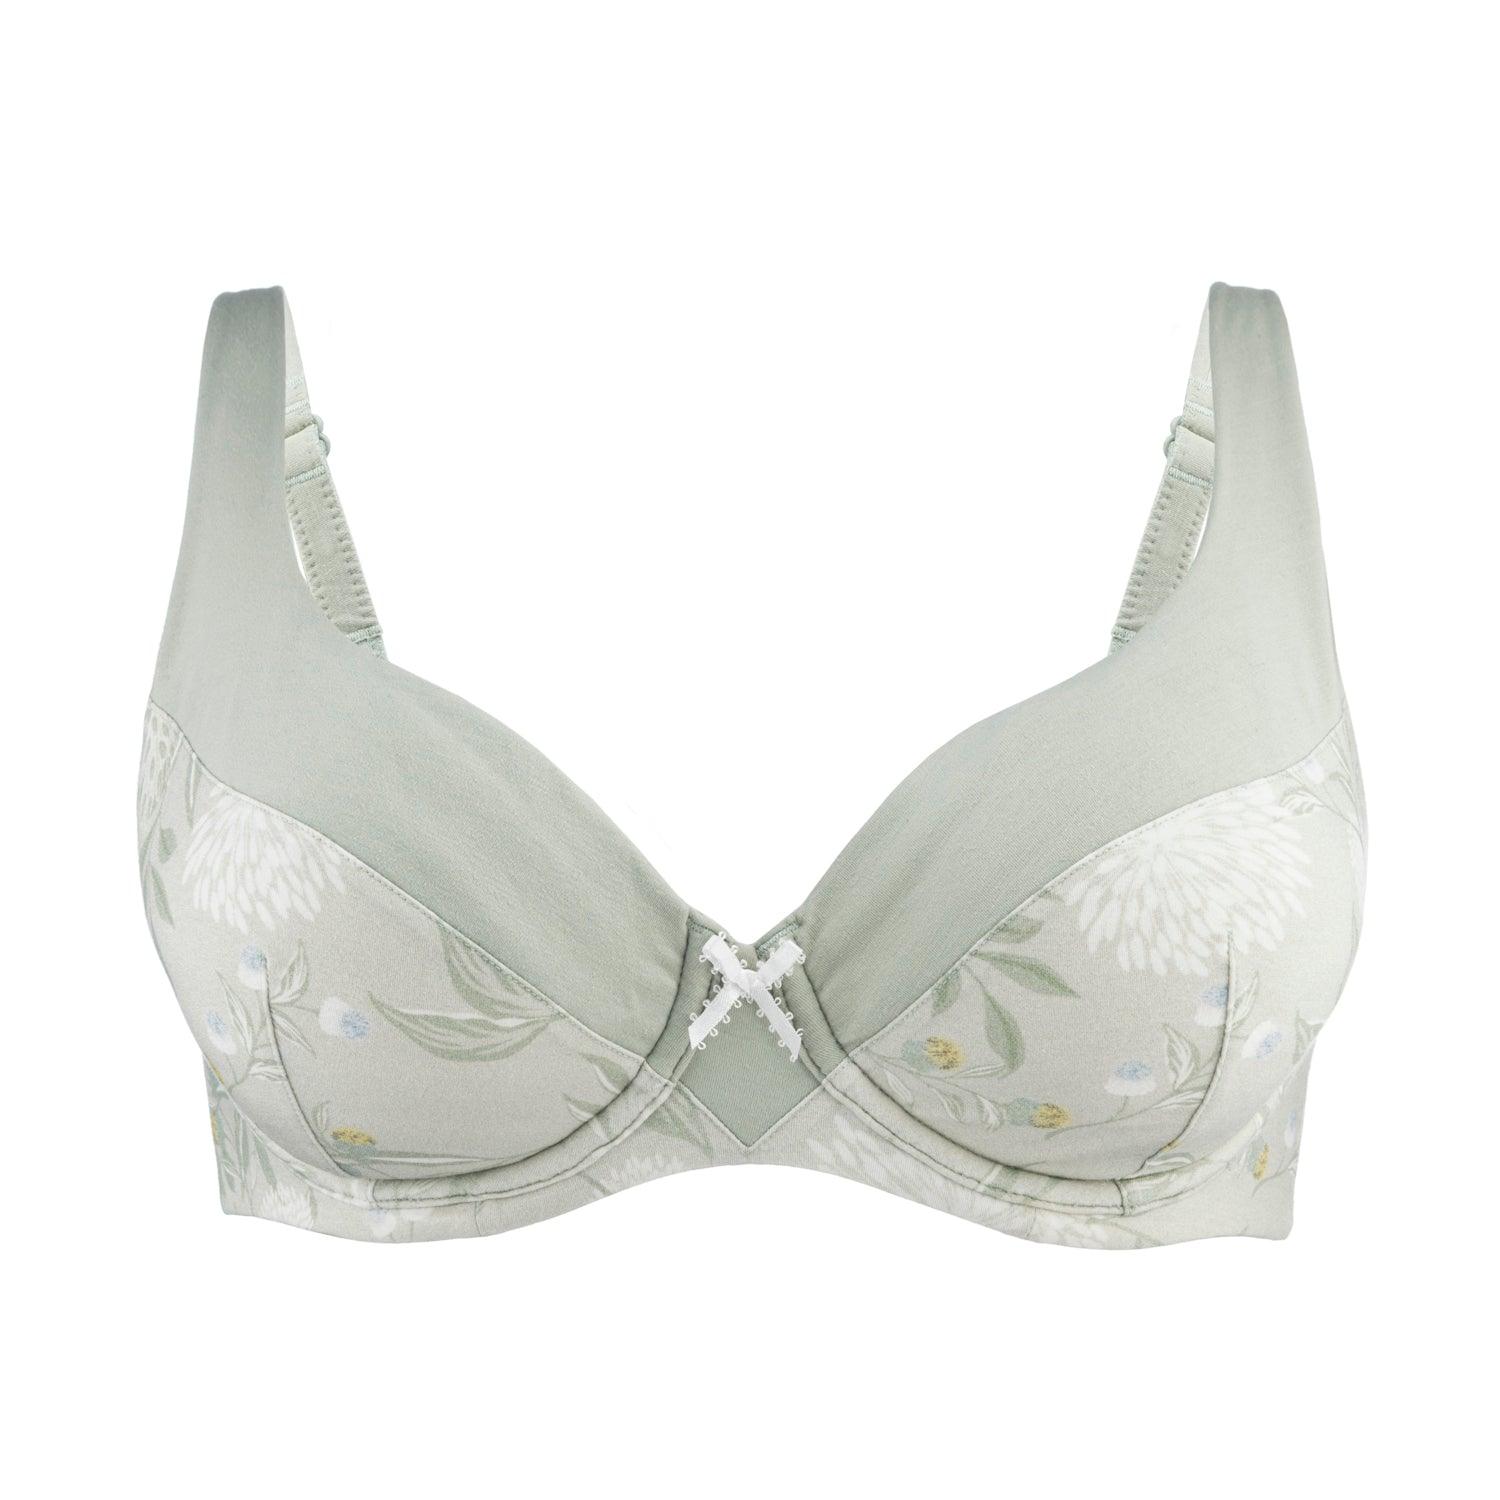 100% Organic Cotton Underwire Bra with Silk and Lace - Sunbleached